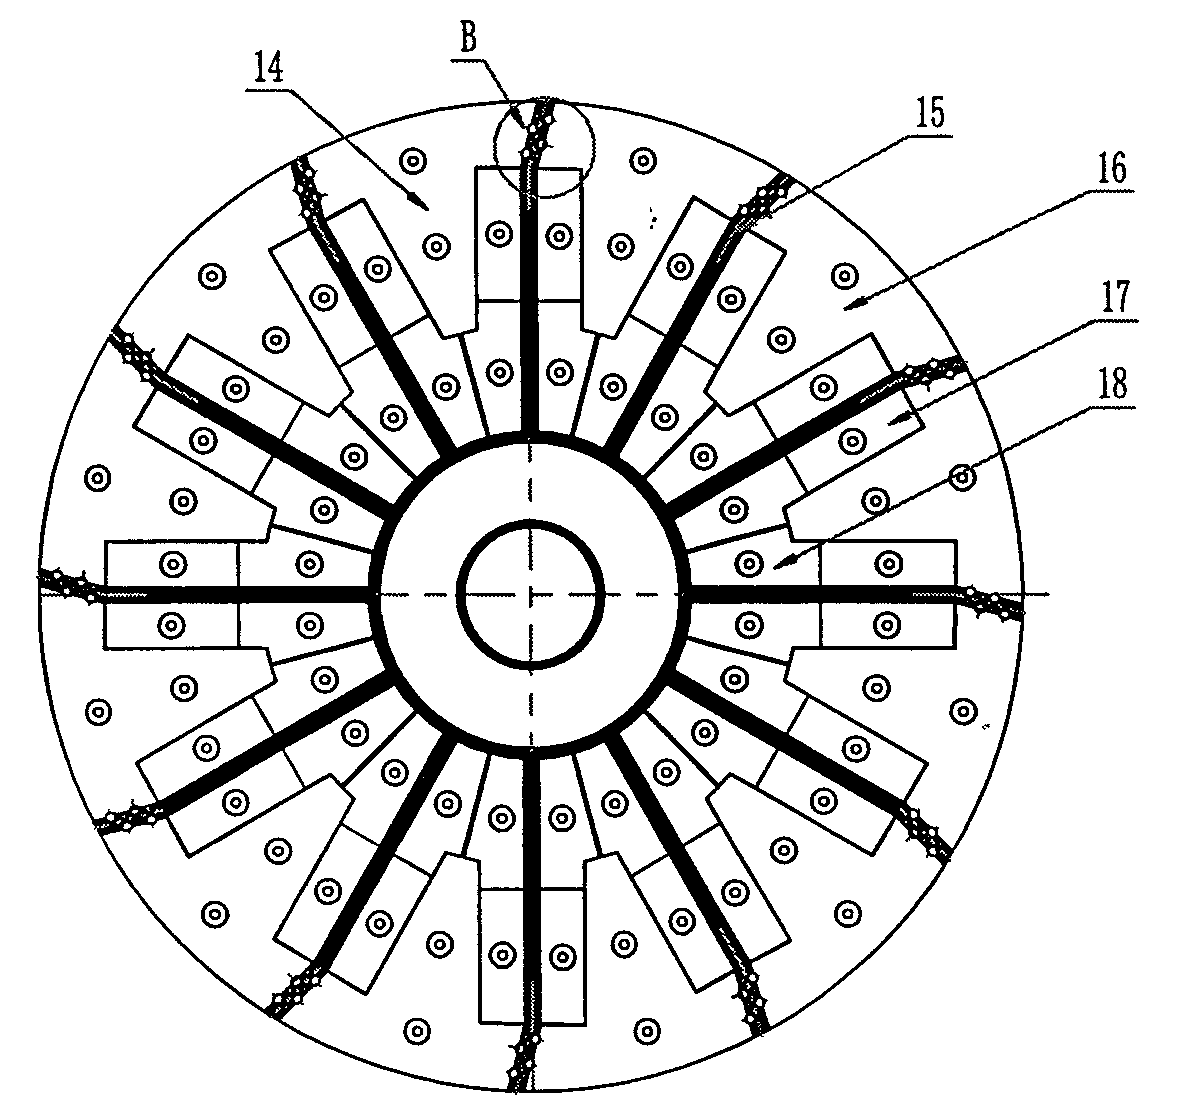 Rotary sealed material discharging device